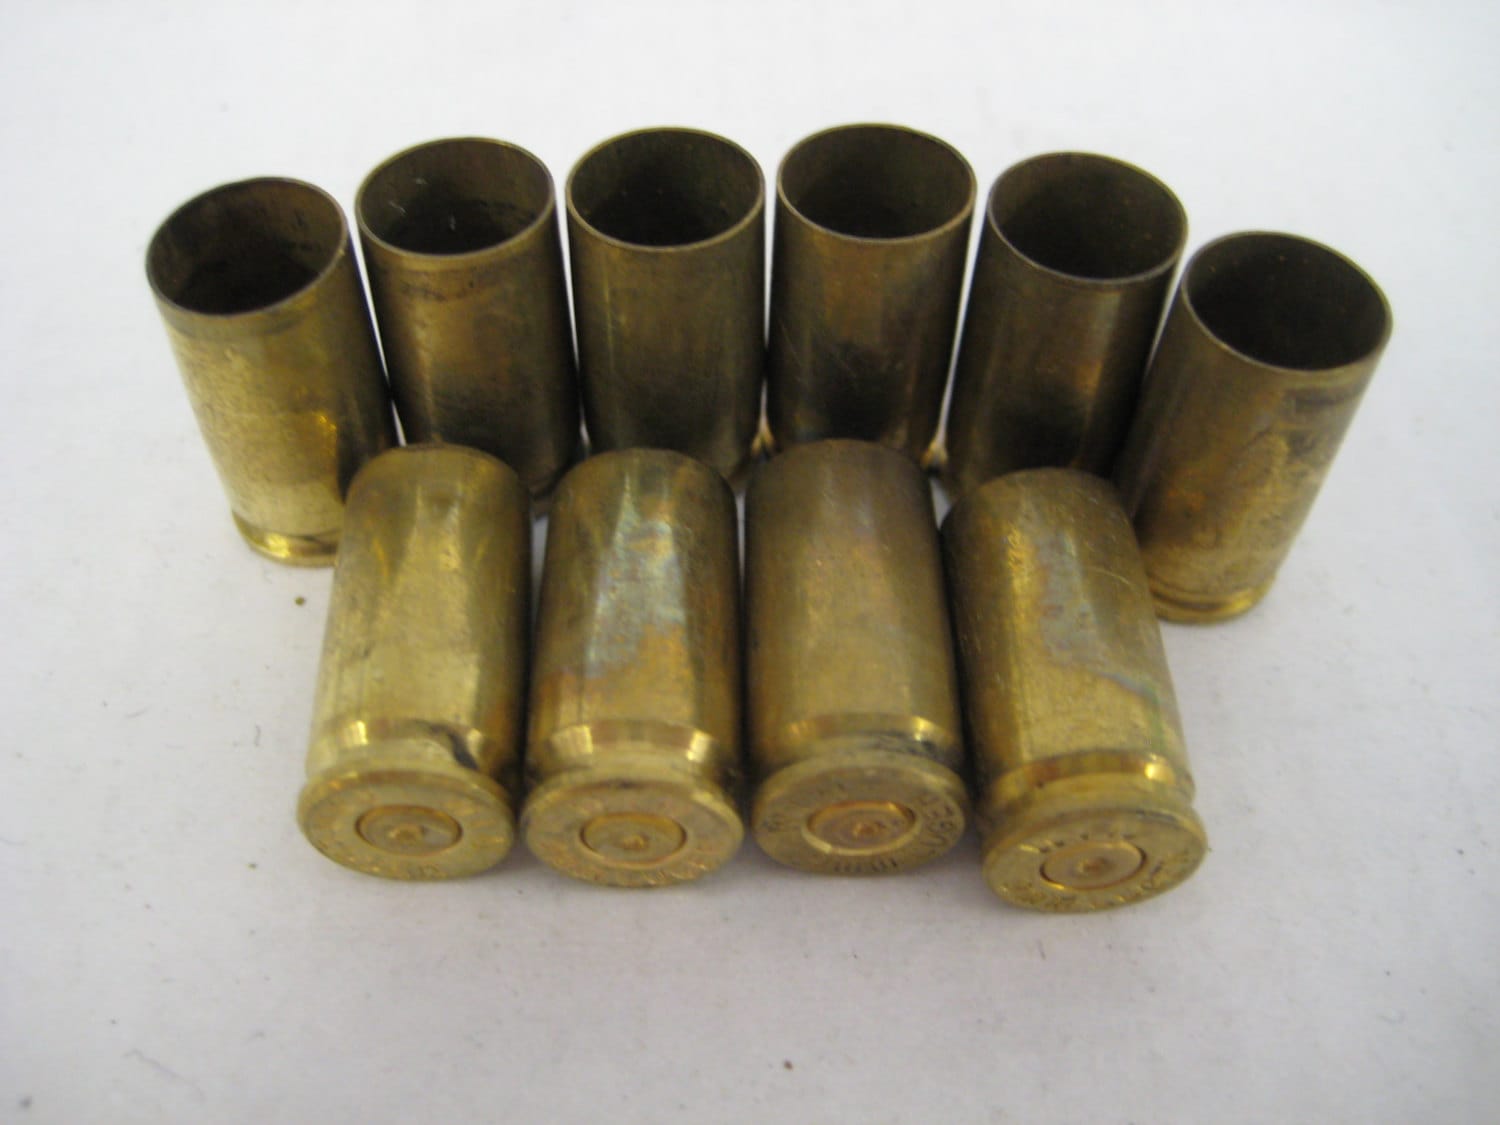 Spent Bullet Shell Casings 9mm by Winchester....Great for